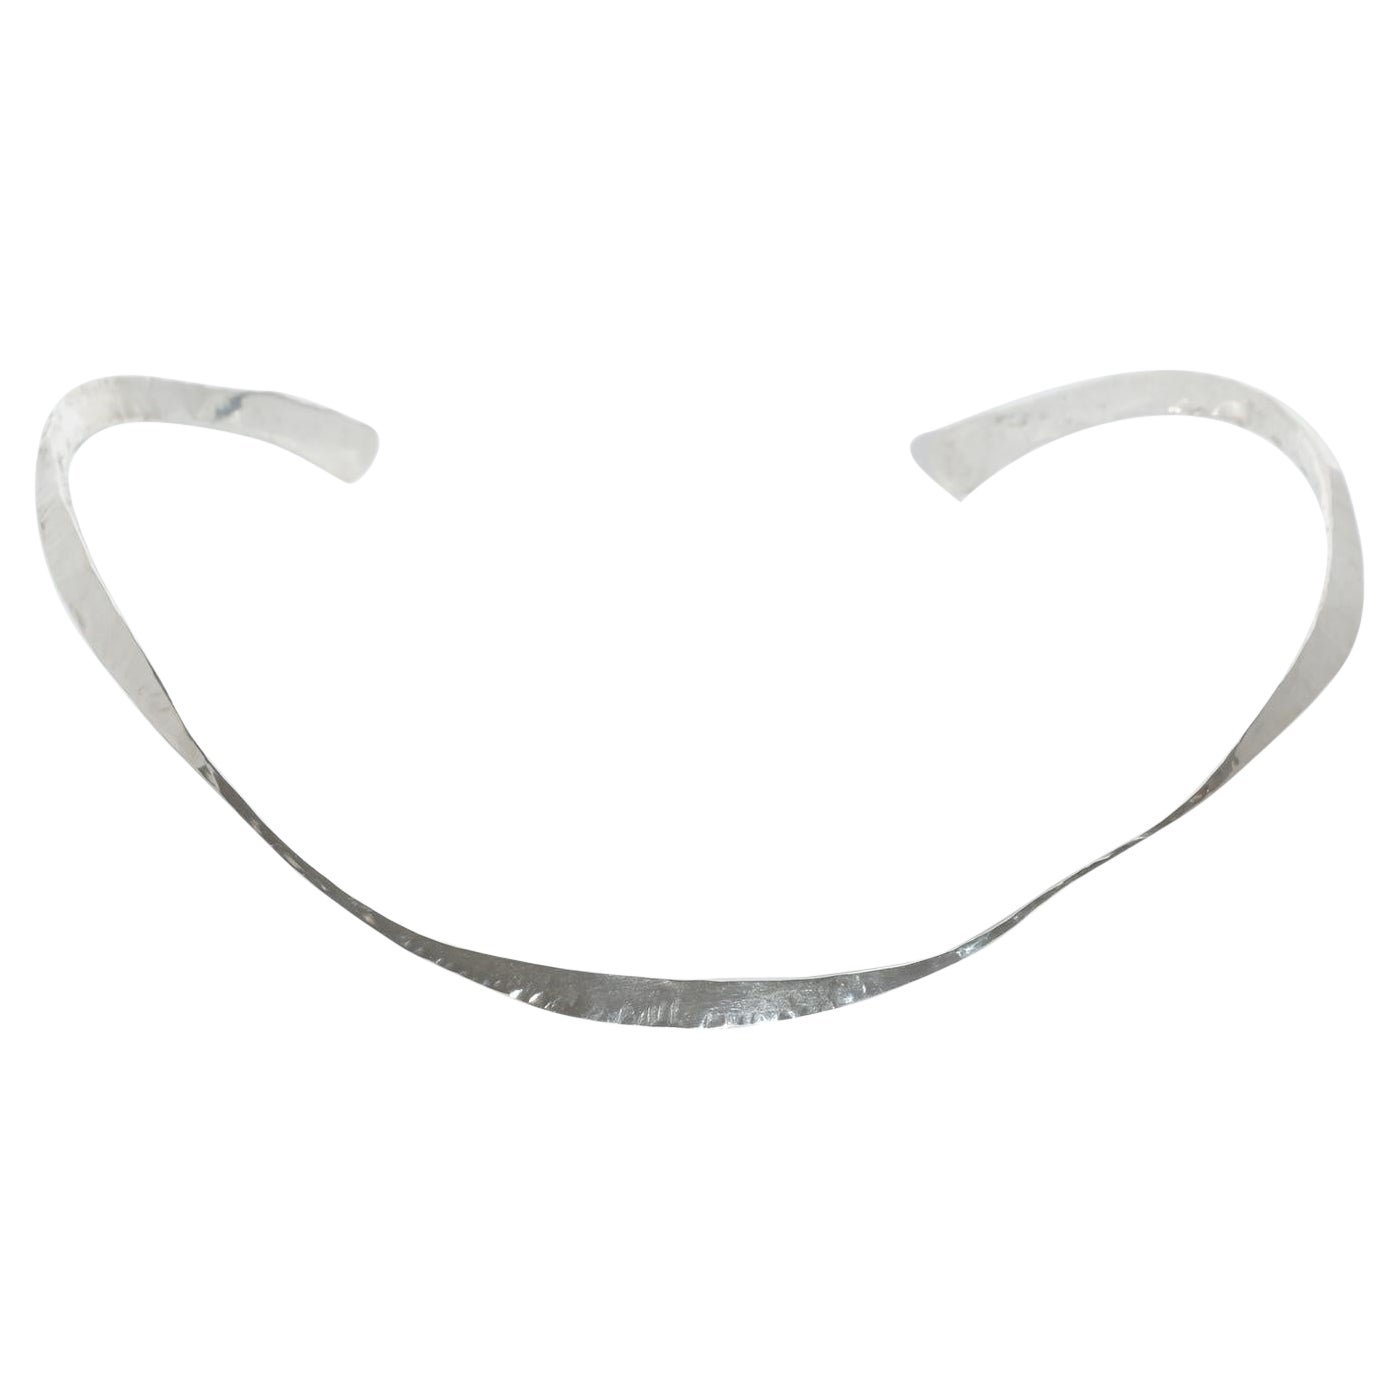 Silver Neck Ring by Swedish Silver-Smith Claës Giertta, Made Year 1970